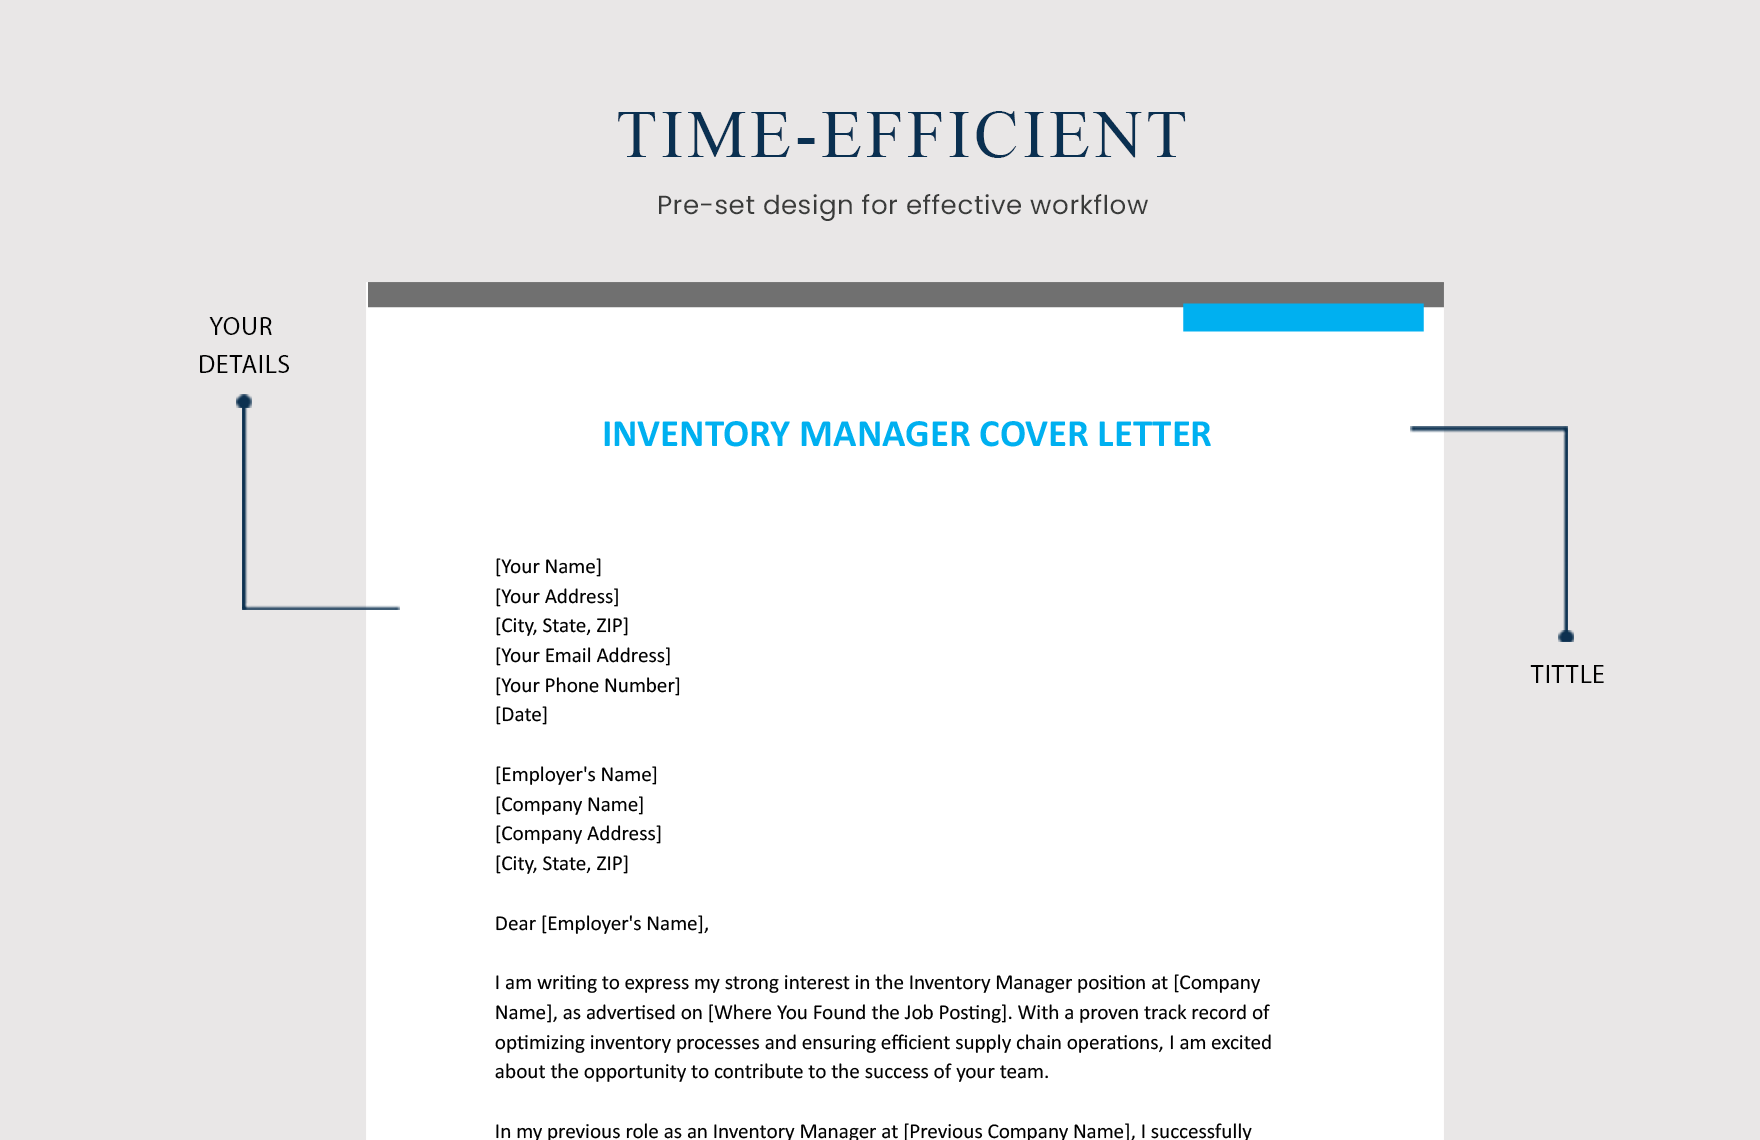 Inventory Manager Cover Letter